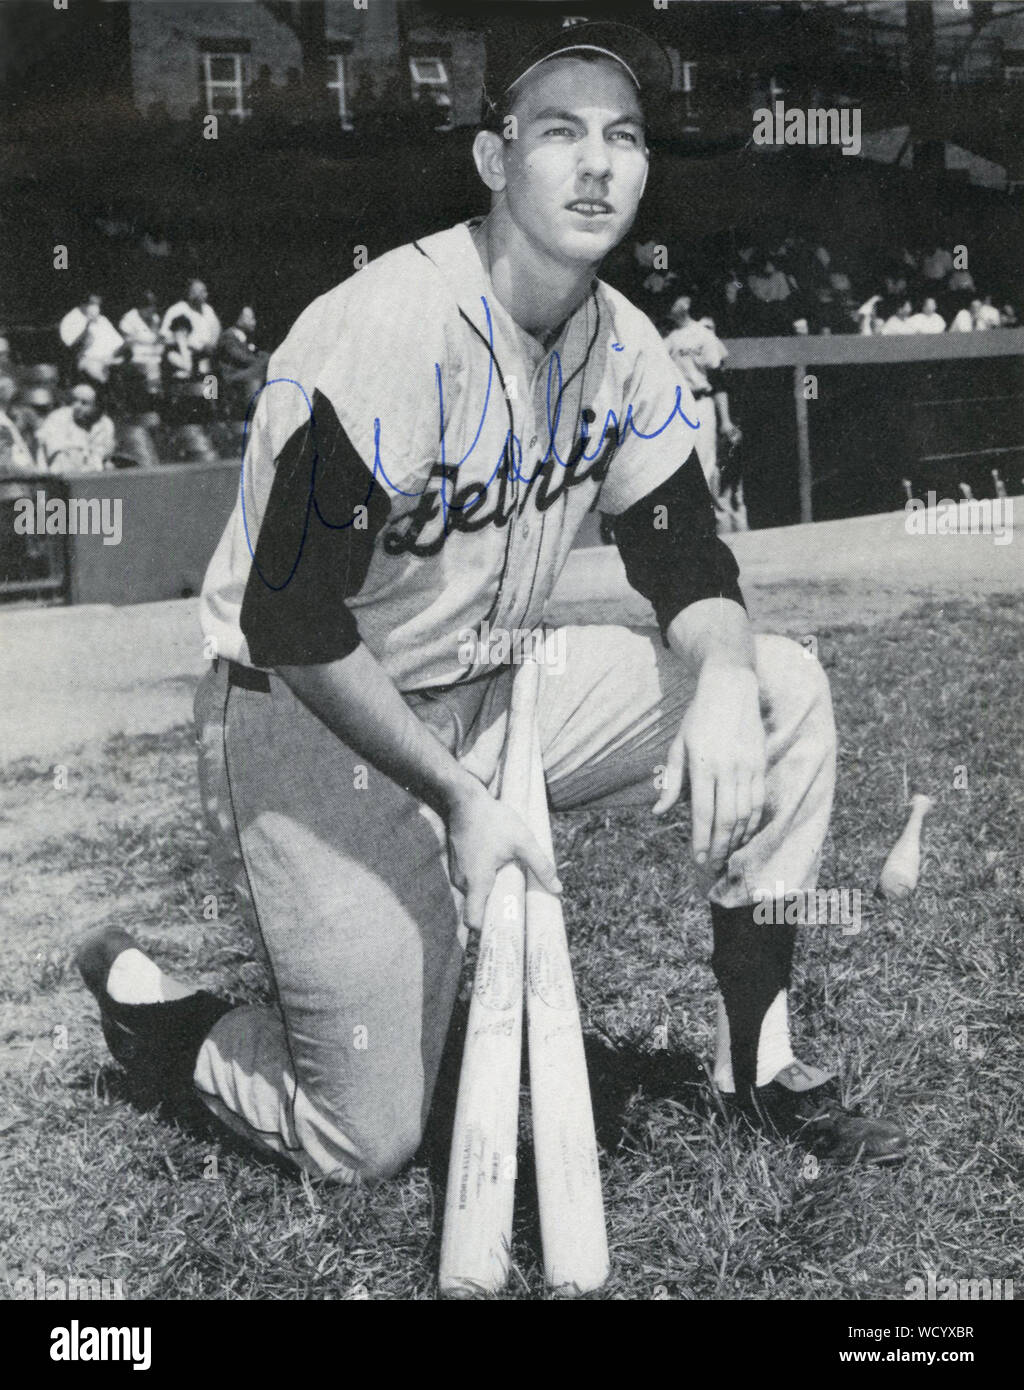 Autographed photo of Al Kaline who was a Hall of Fame baseball player with the Detroit Tigers  in the 1950s, 60s and 70s. Stock Photo